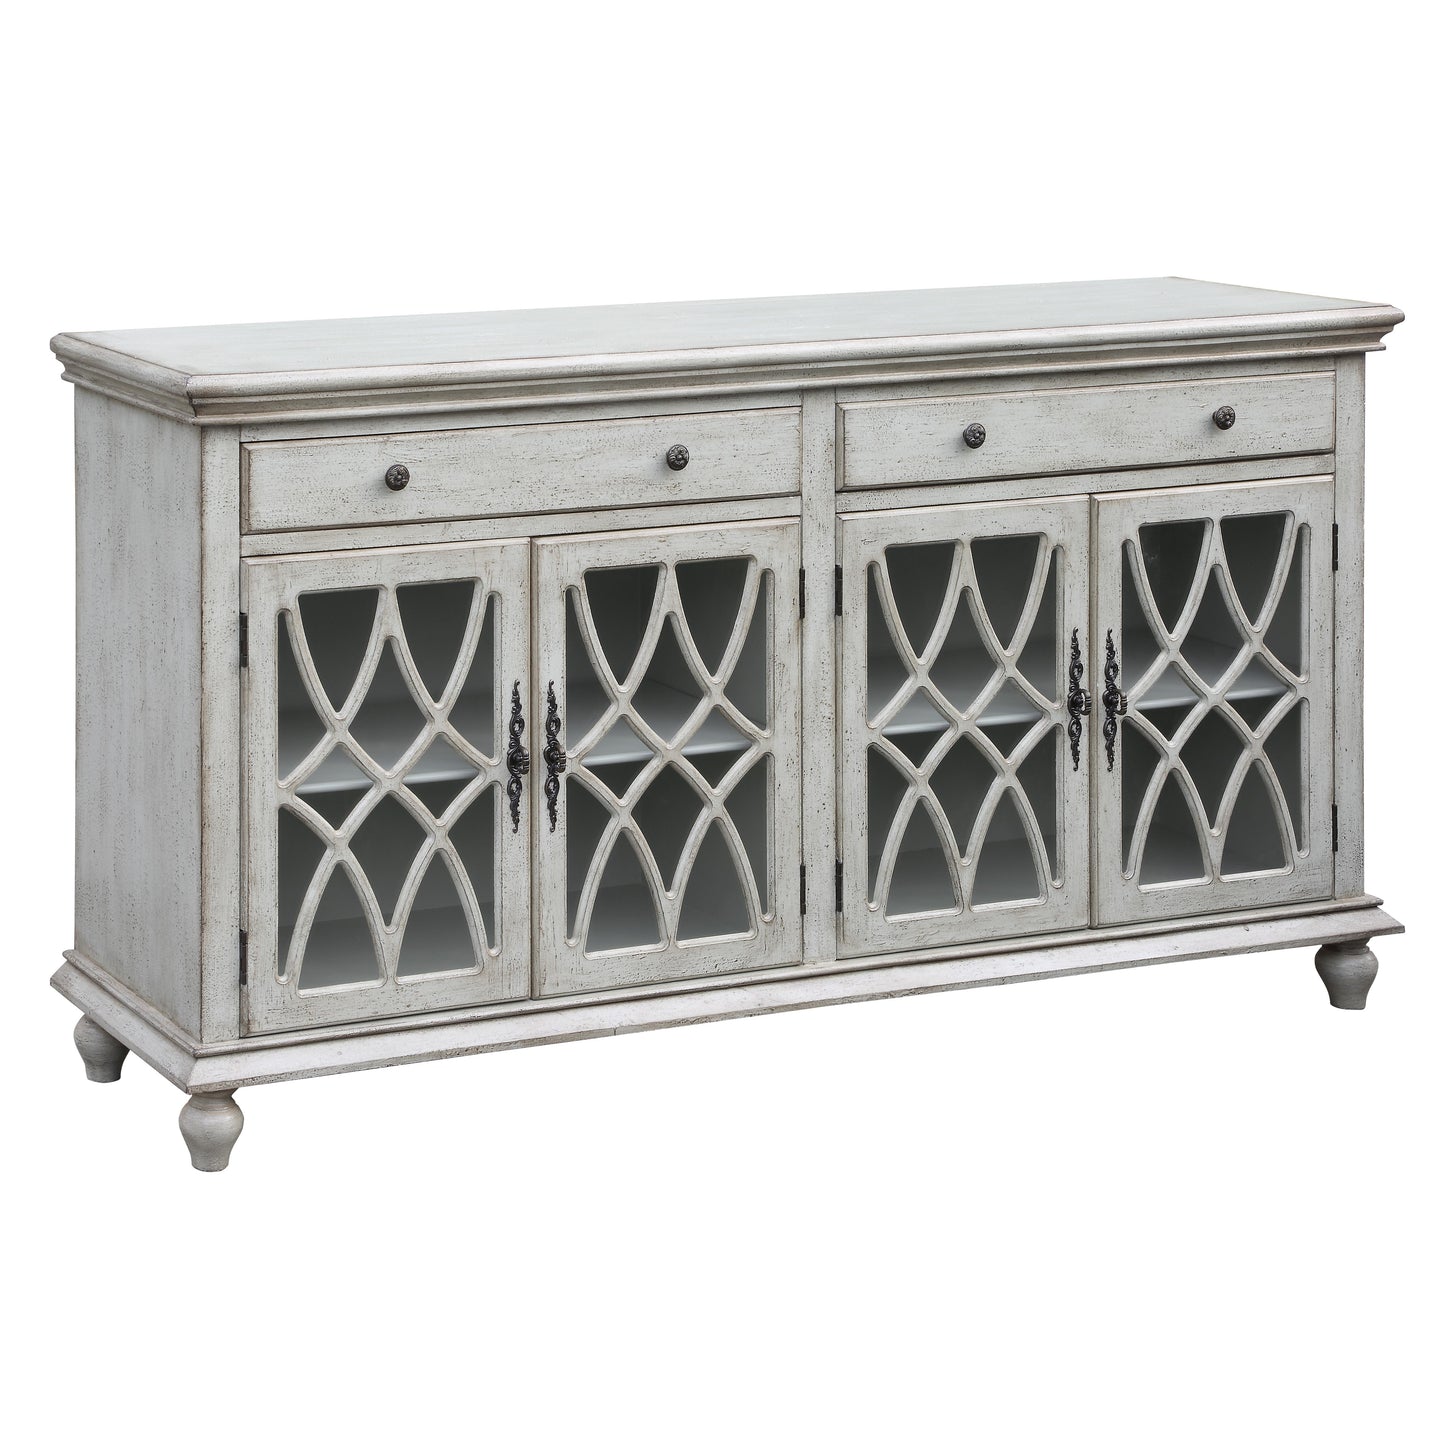 Crestview Collection Paxton 72" x 18" x 39" 2-Drawer 4-Door Traditional Pale Gray Wood Sideboard